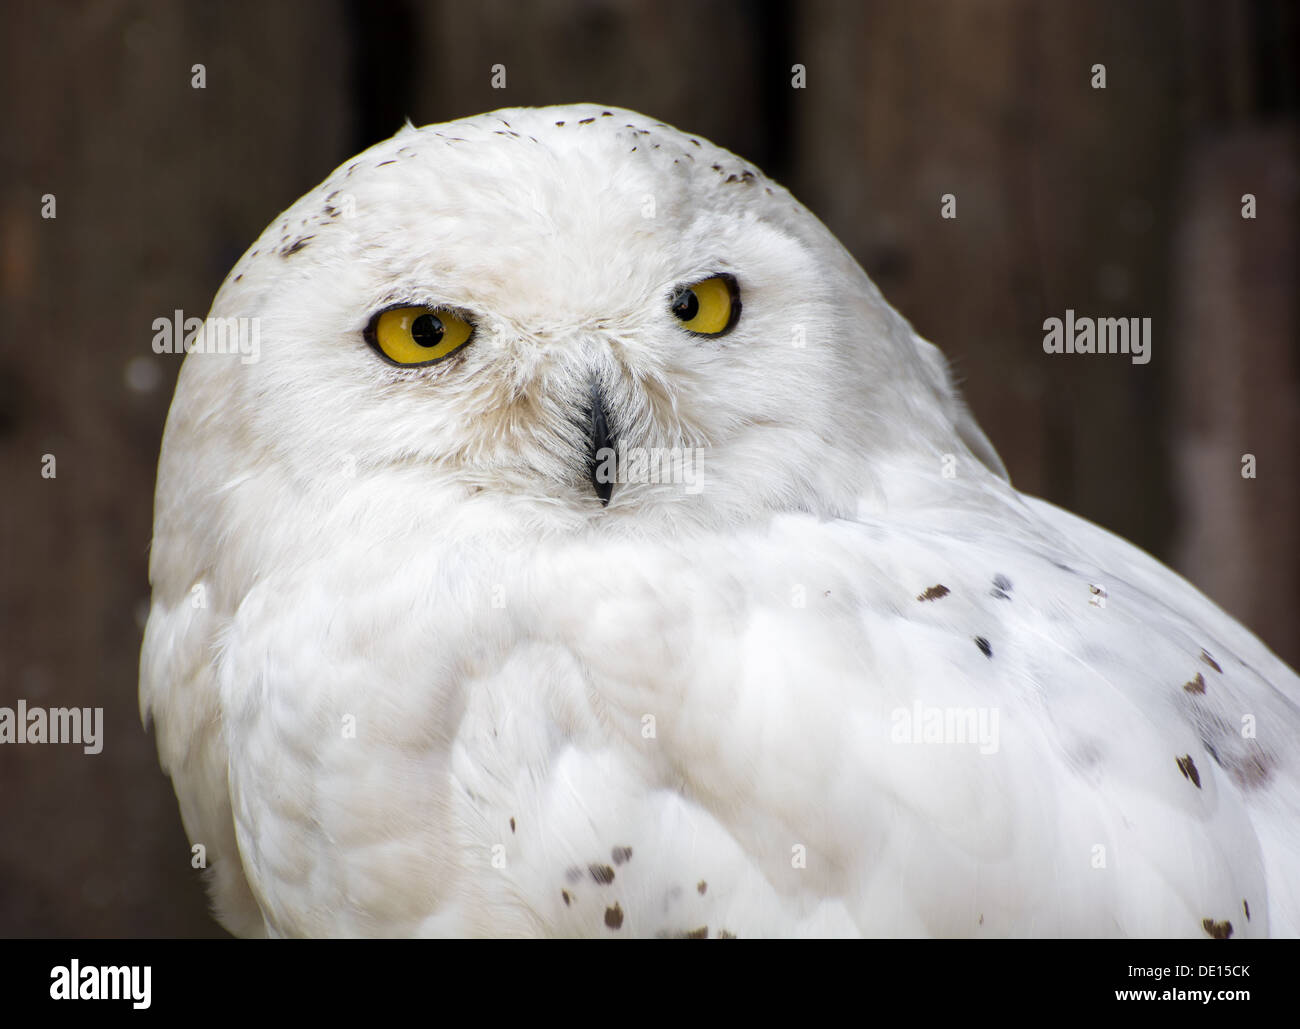 The Snowy Owl (Nyctea scandiaca) (Bubo scandiacus) is a large owl of the typical owl family Strigidae. Stock Photo